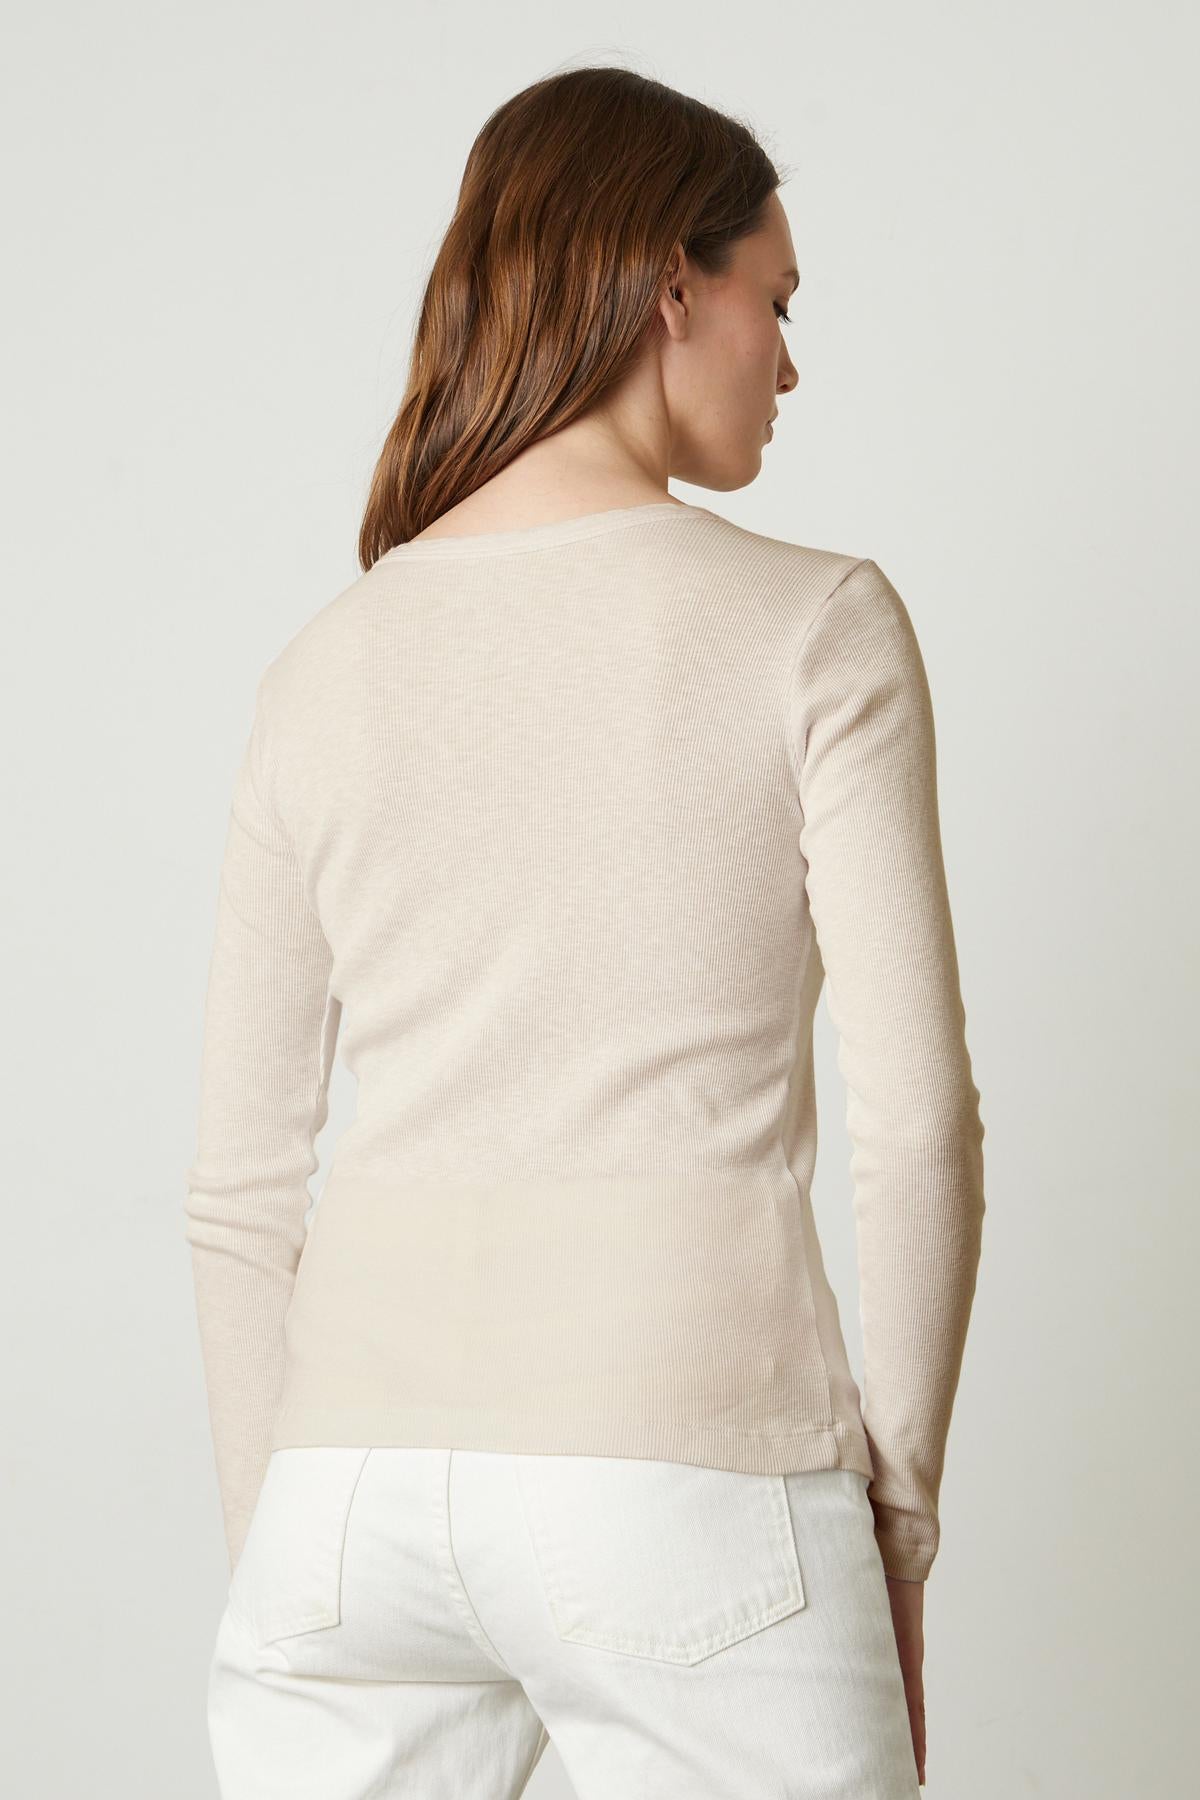 The back view of a woman wearing a Velvet by Graham & Spencer BAYLER RIBBED SCOOP NECK TEE sweater.-35776210501825